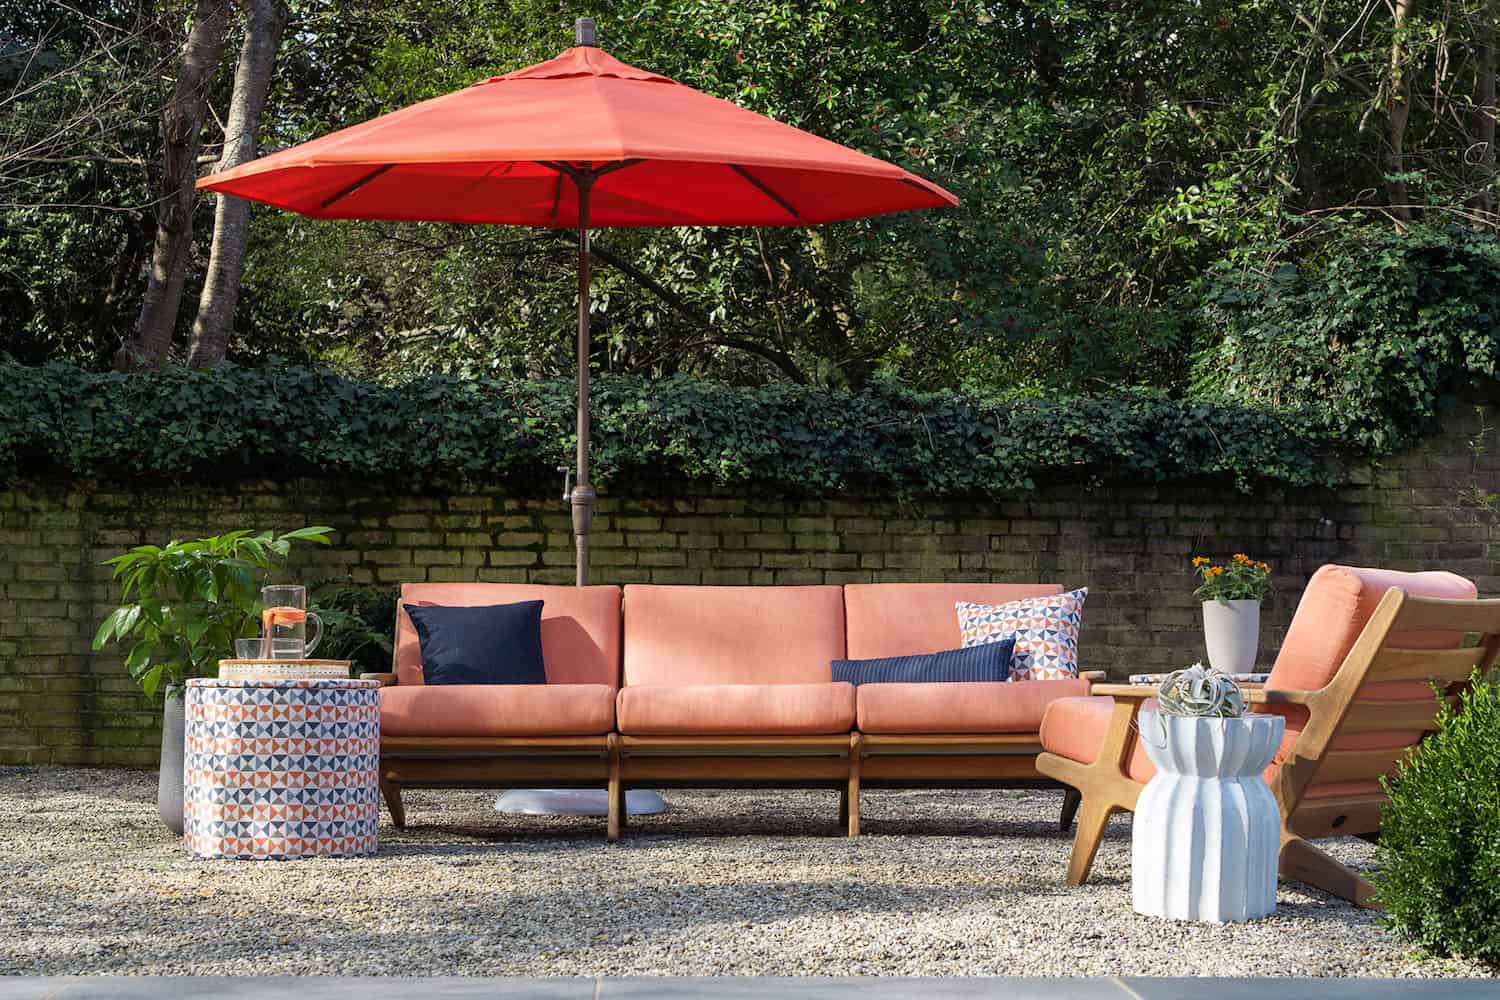 How To Build Outdoor Cushions With Sunbrella